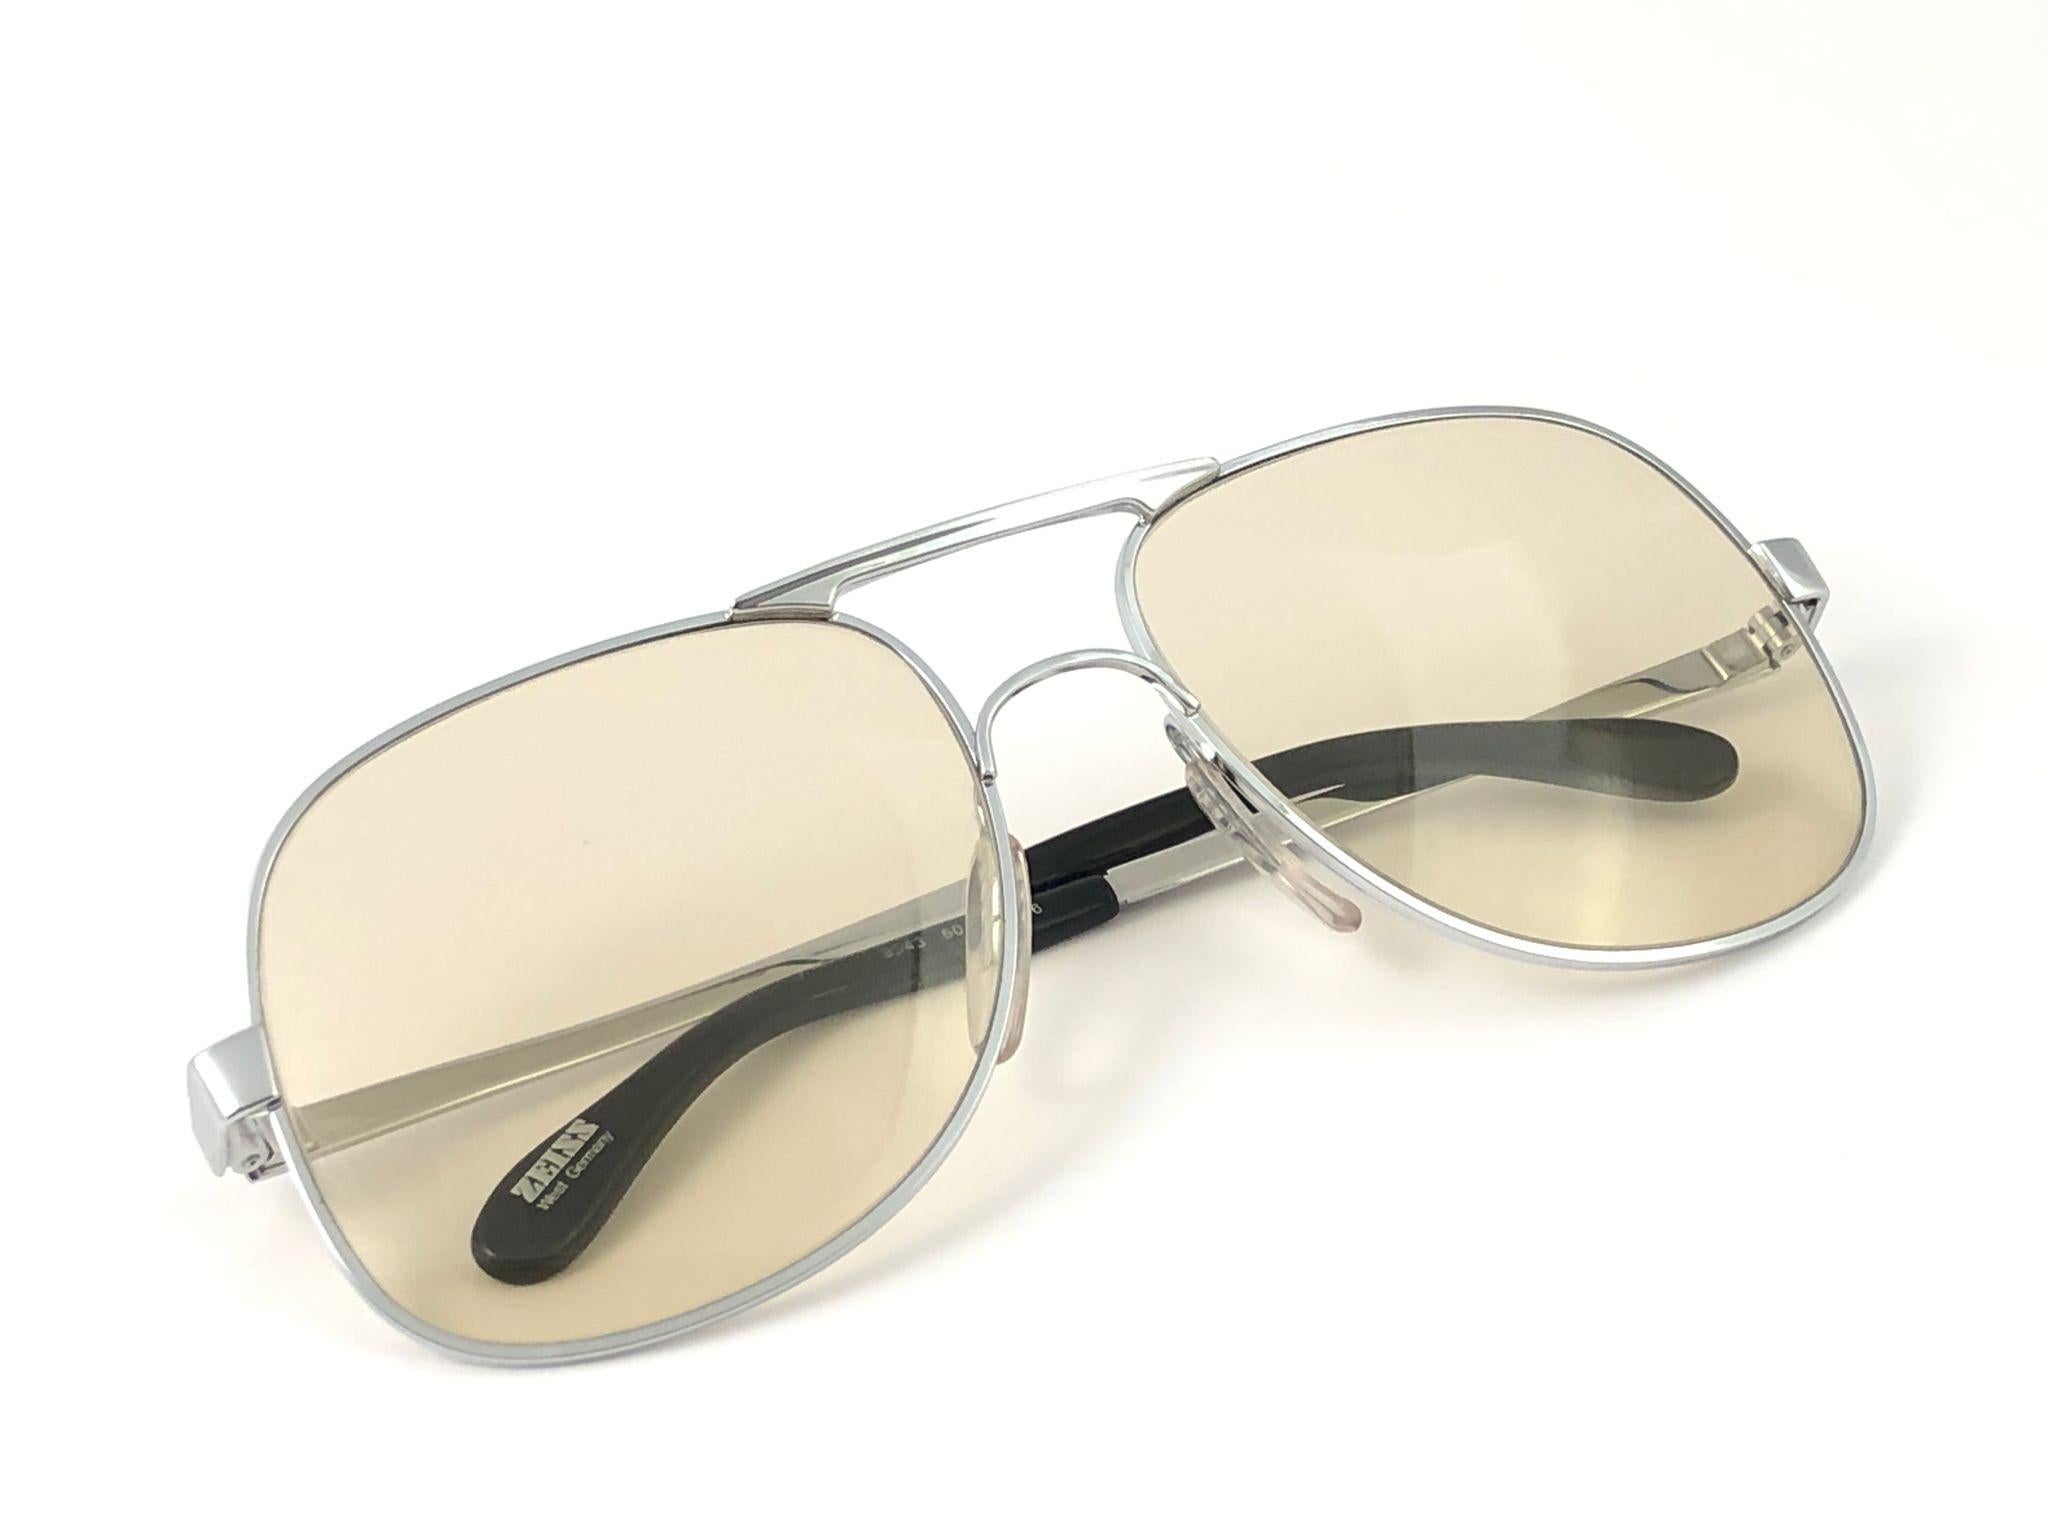 New Vintage Metzler Zeiss Umbramatic 2083 Oversized Sunglasses West Germany 80's For Sale 4